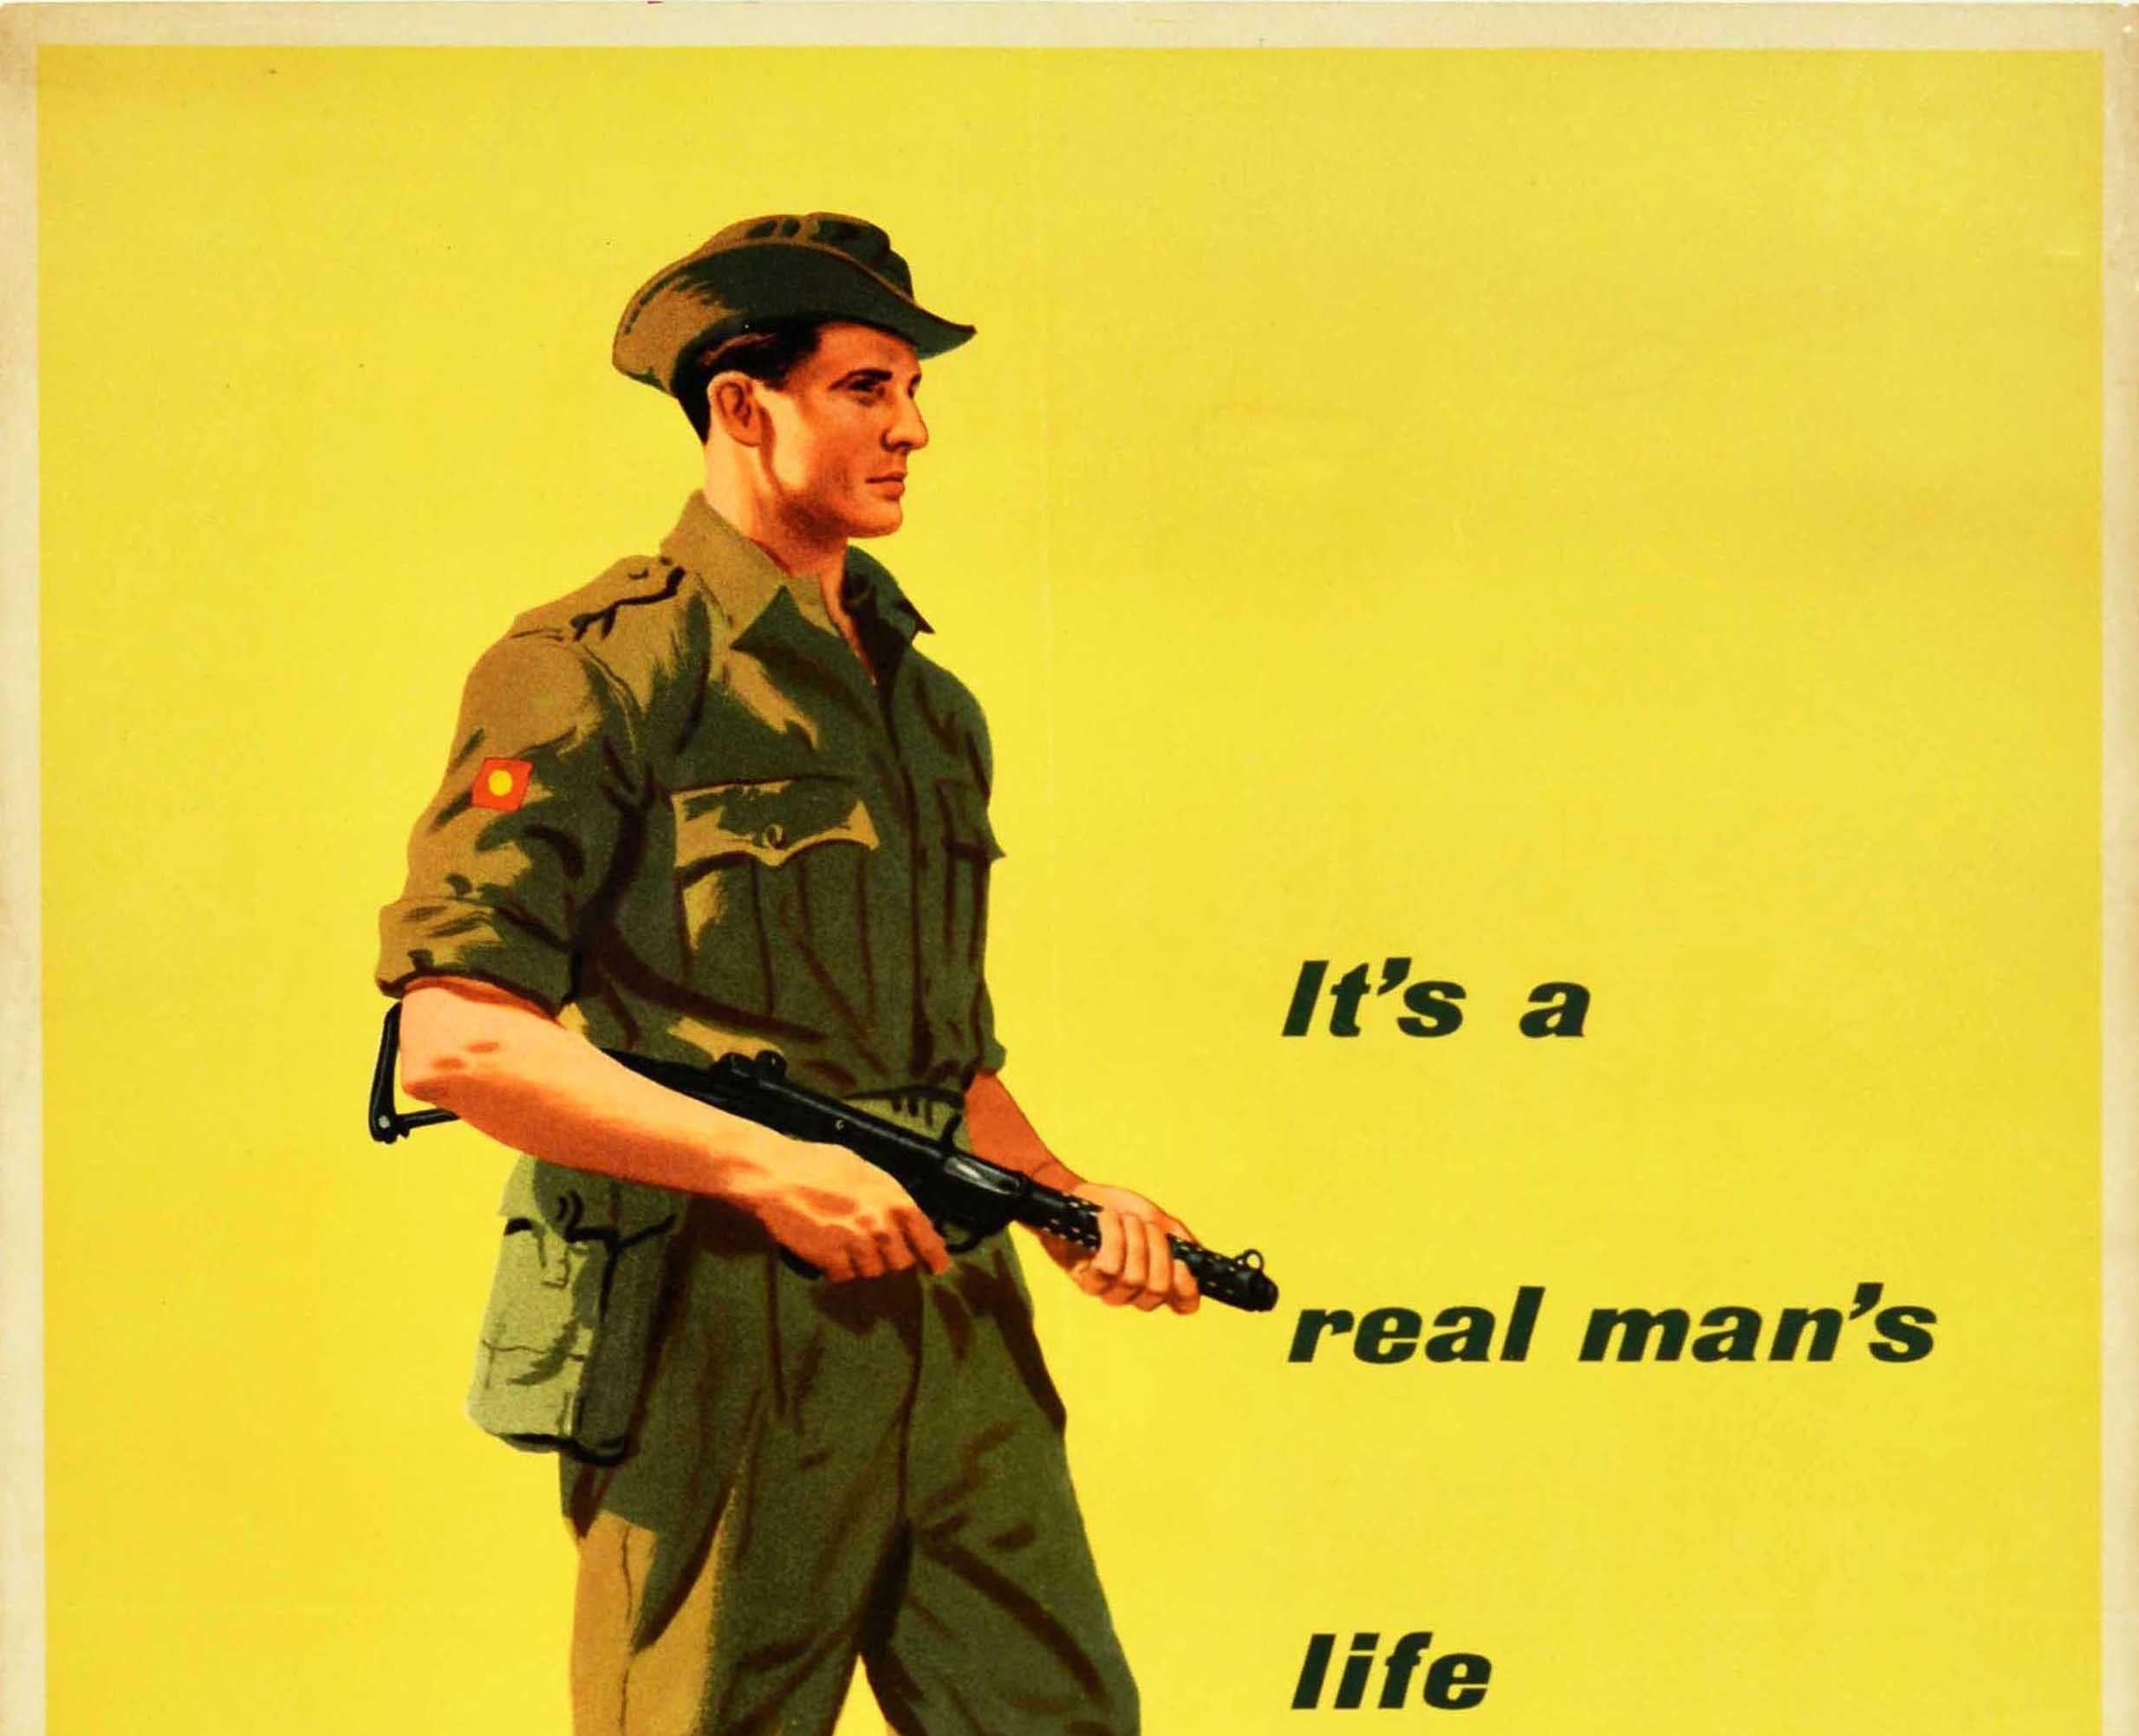 Original vintage military recruitment poster - It's a real man's life Join the Scots Guards - featuring a soldier in green uniform and holding a gun on a bright yellow background, the text on the side and below with the information - Apply to any